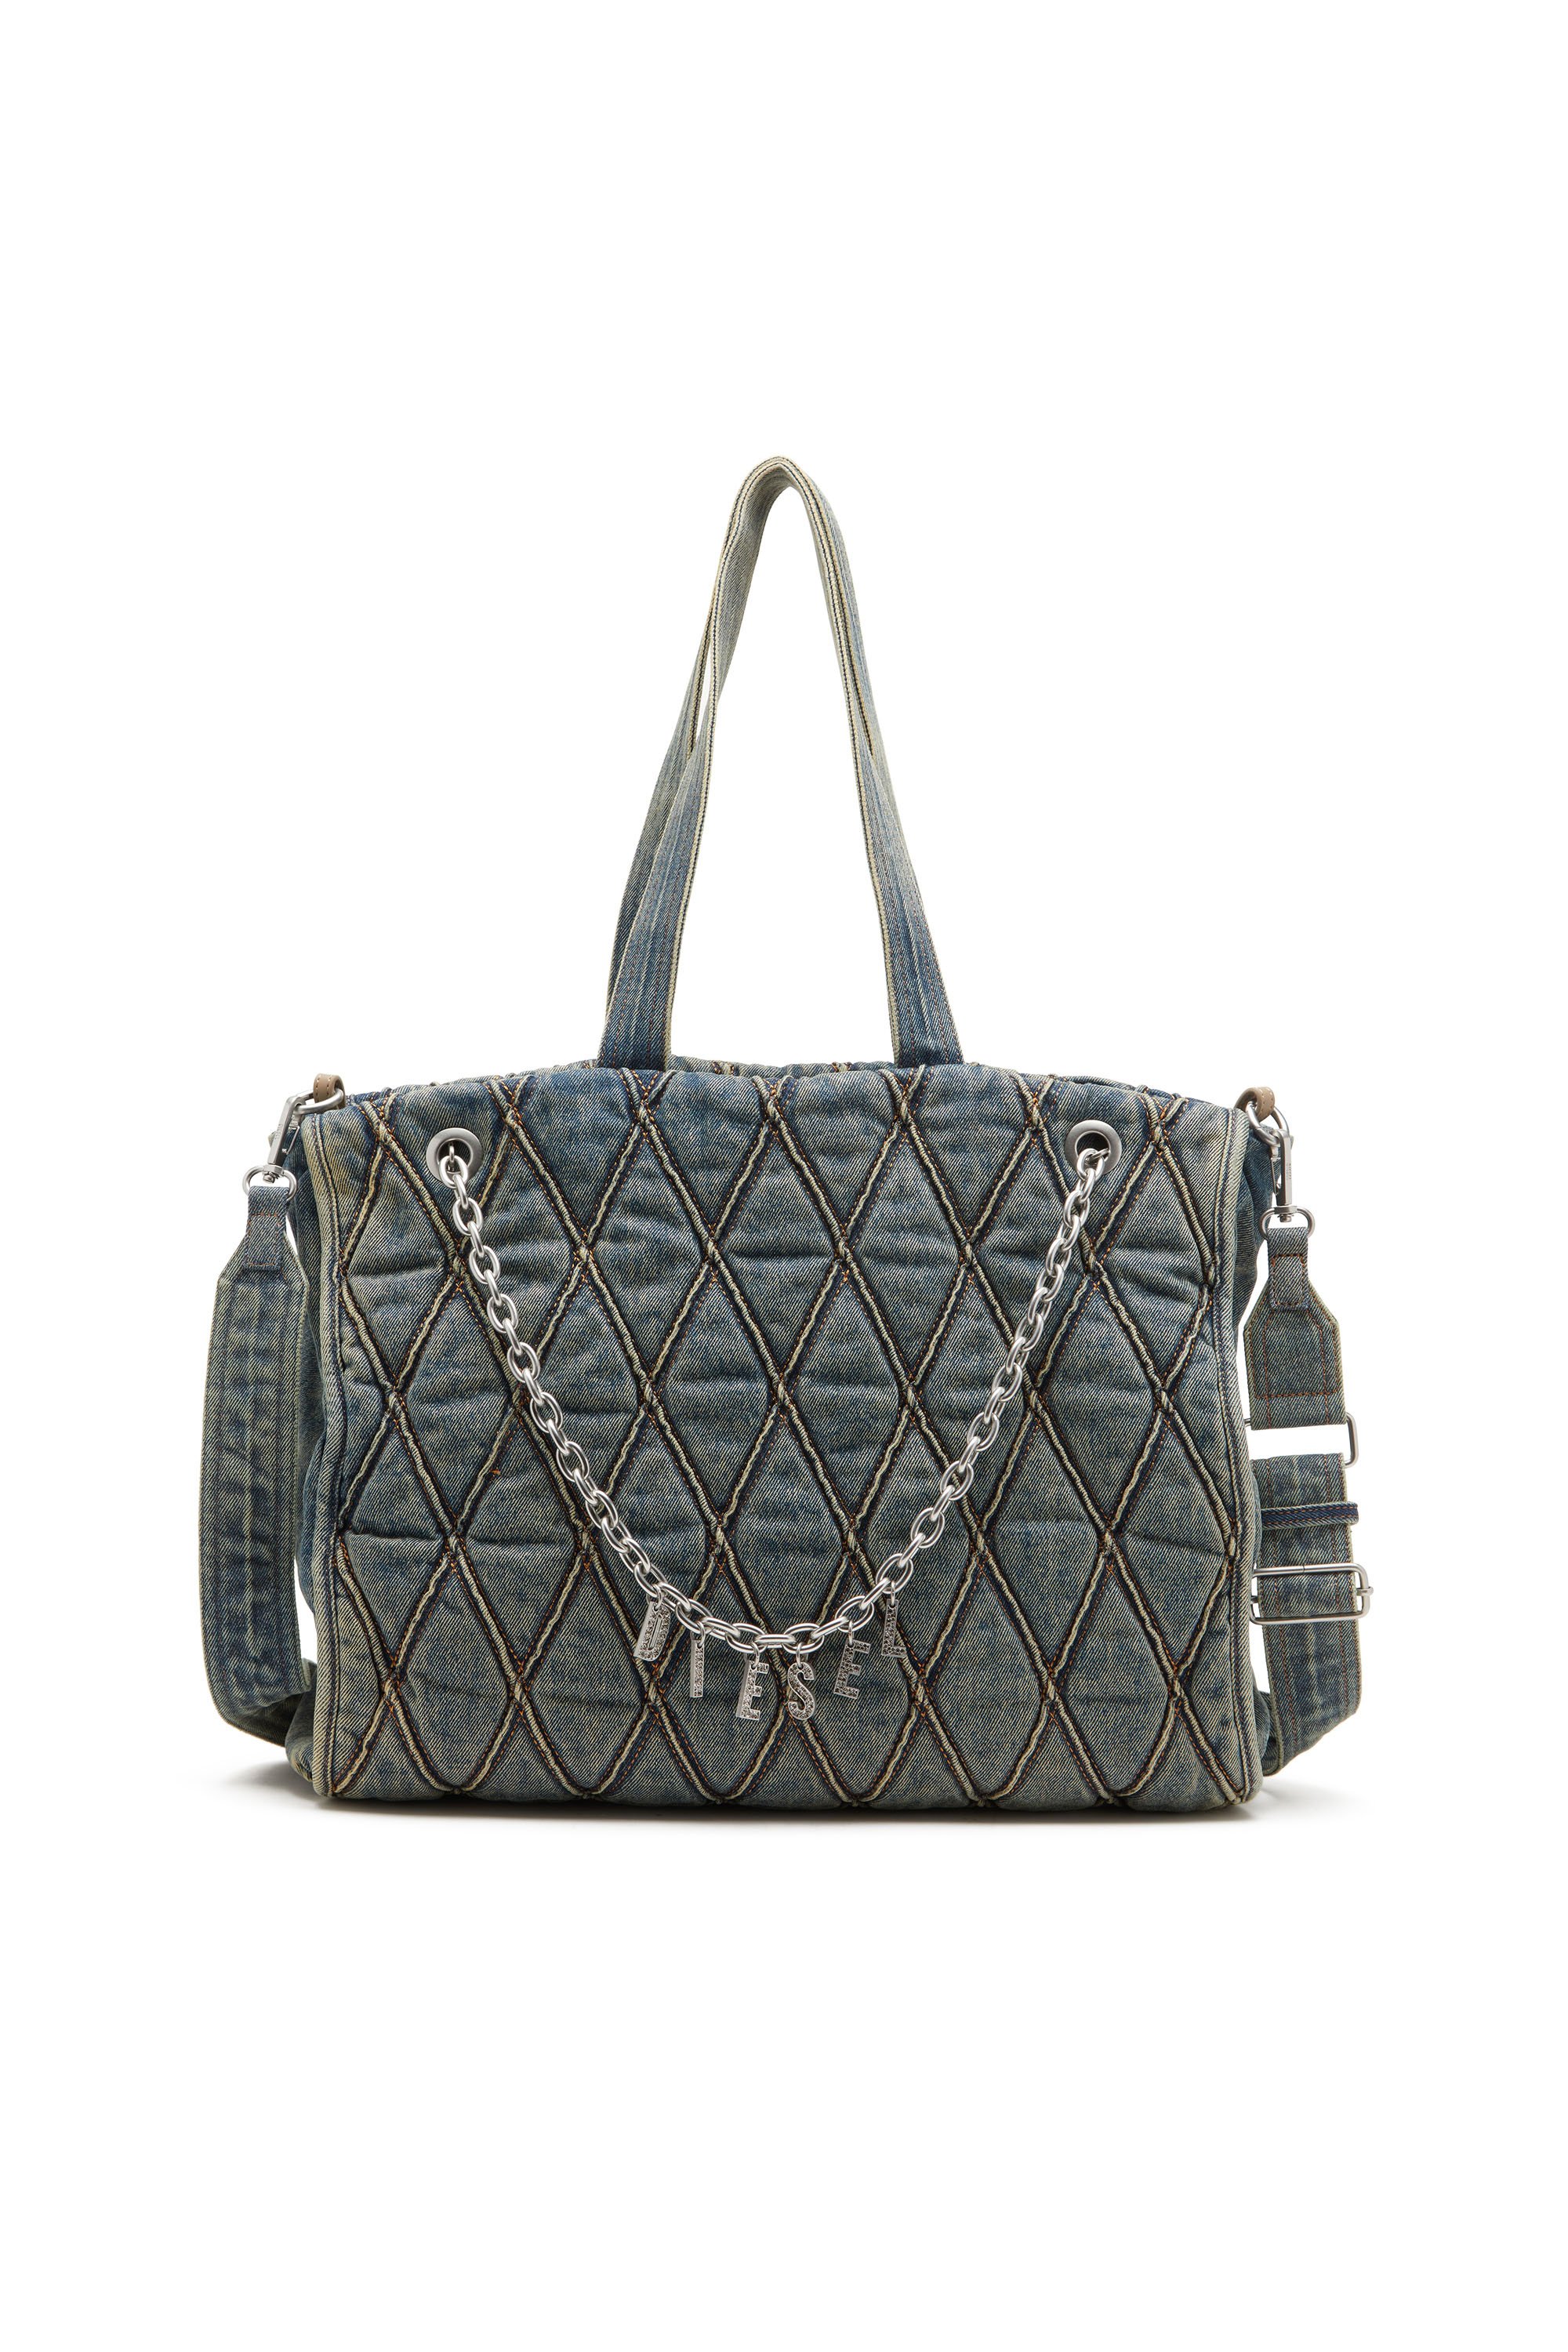 Diesel - CHARM-D SHOPPER, Woman Charm-D-Tote bag in Argyle quilted denim in Blue - Image 1